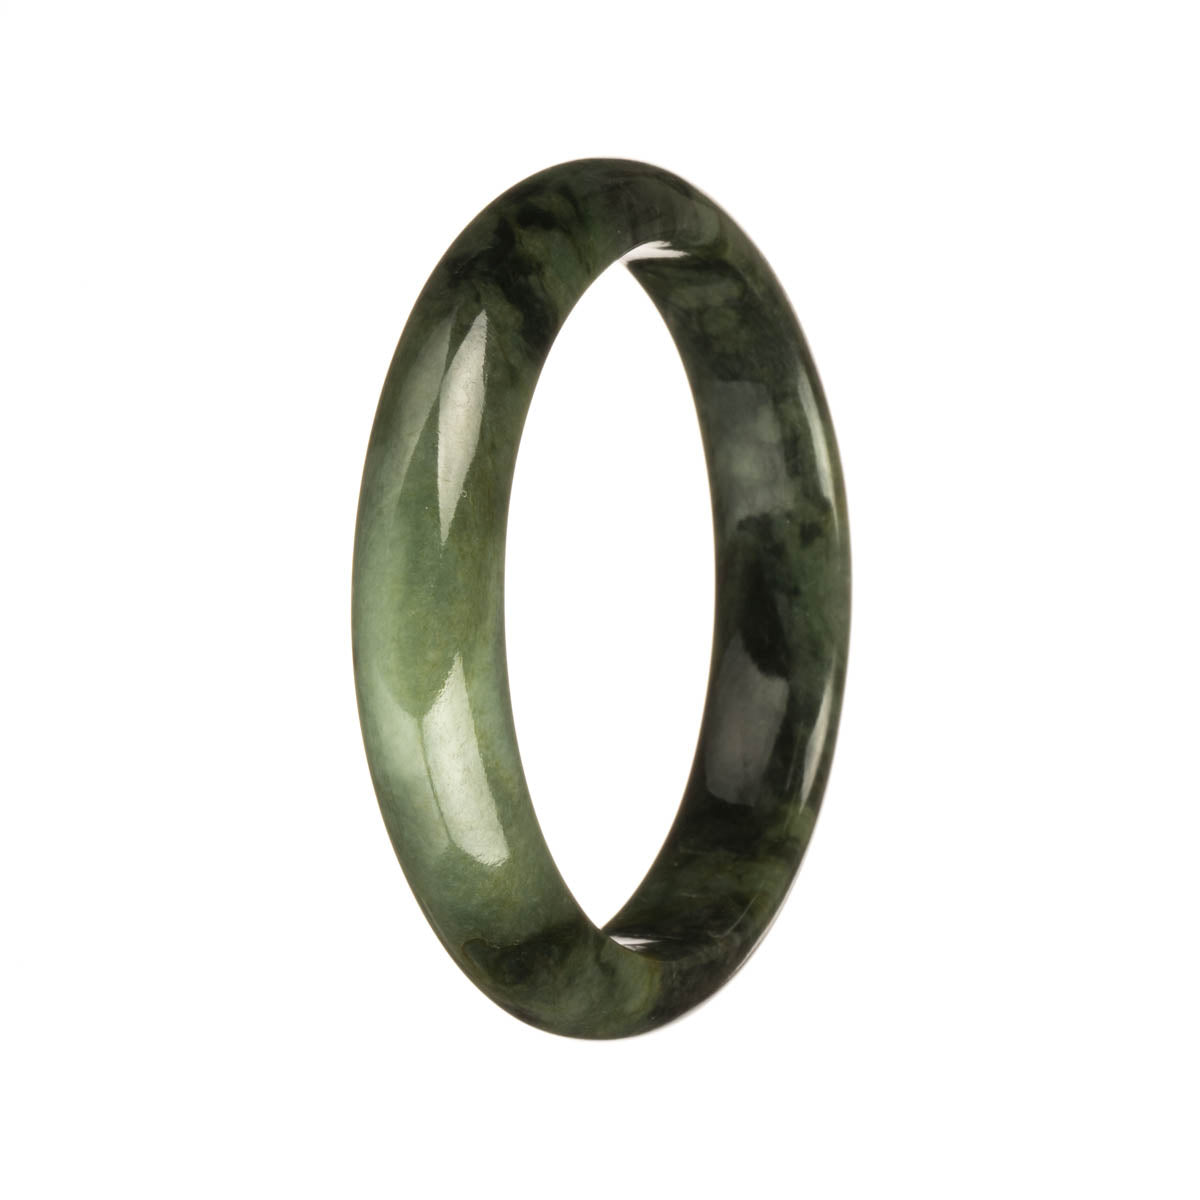 An artisan bracelet made of genuine untreated olive green jadeite jade, featuring intricate dark green patterns. The bracelet is in a 56mm half moon shape, exuding natural beauty. Designed by MAYS.